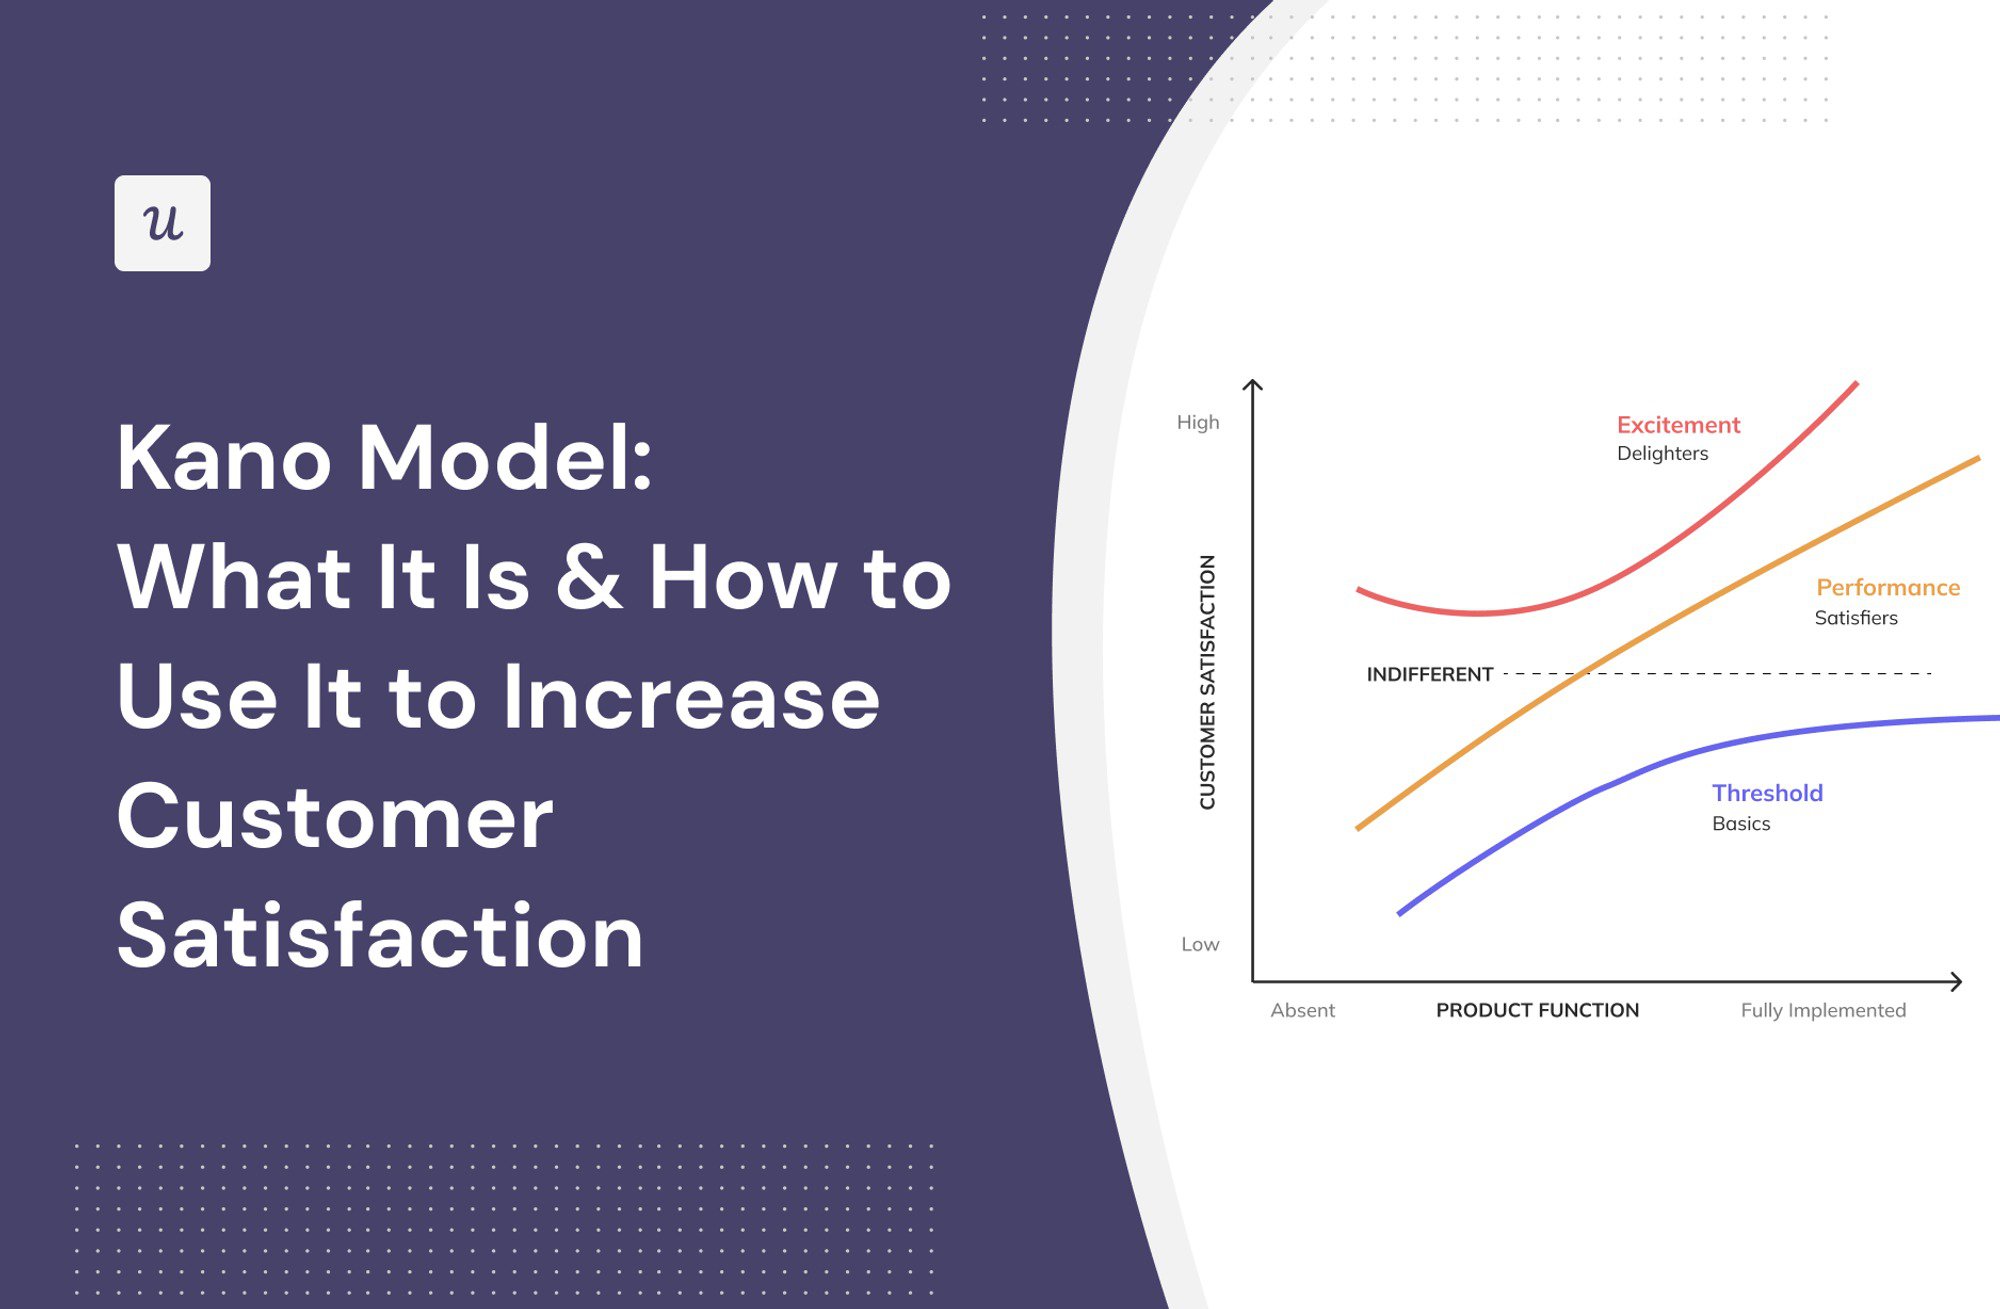 Kano Model: What It Is & How to Use It to Increase Customer Satisfaction cover